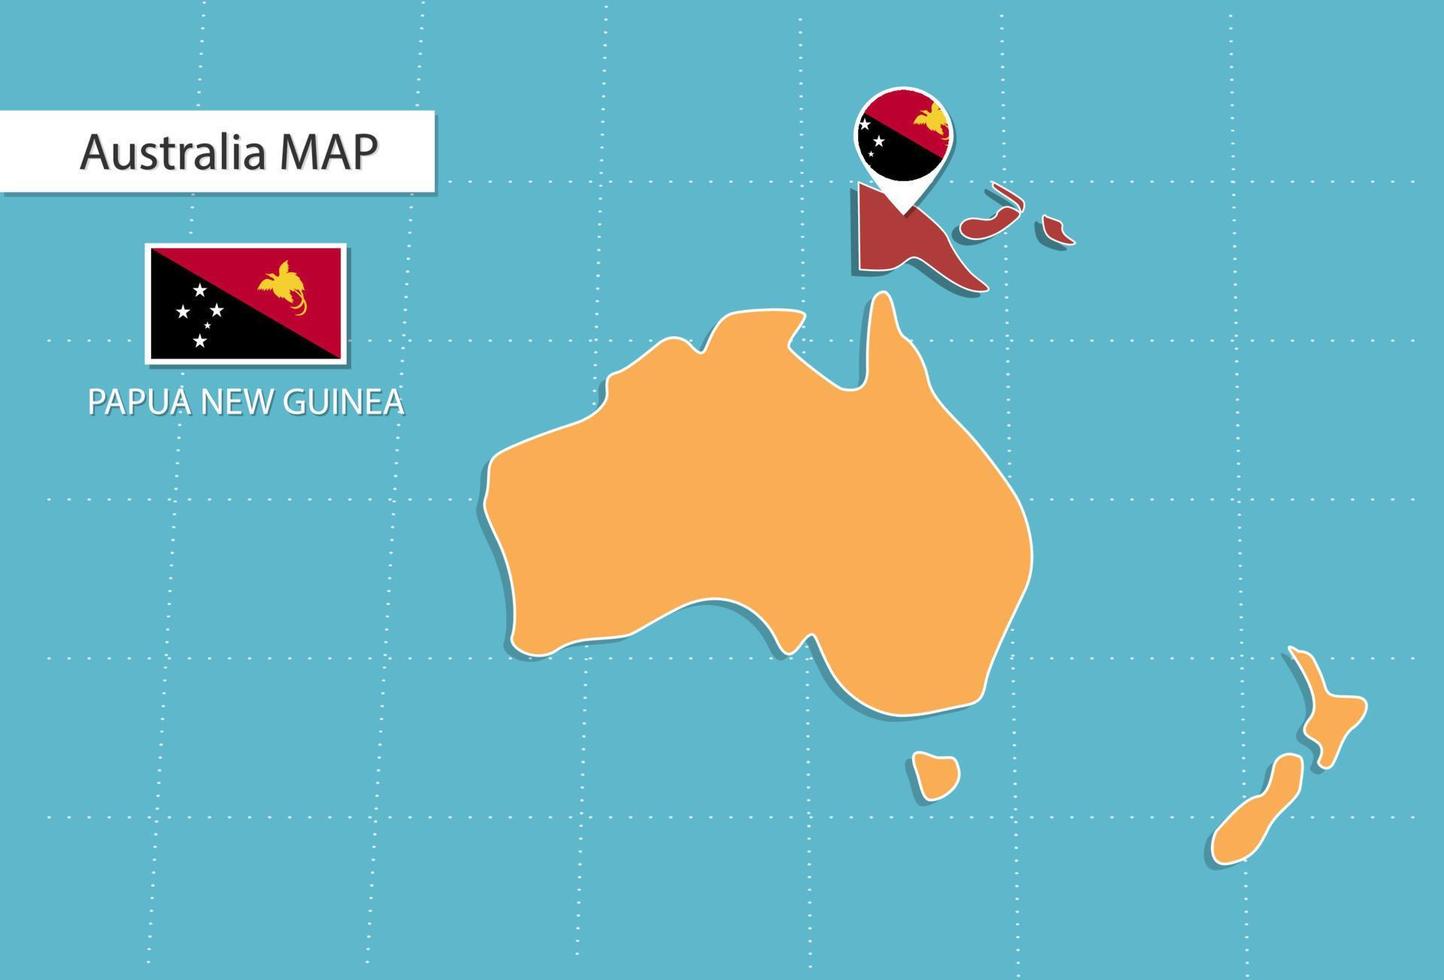 Papua New Guinea map in Australia, icons showing Papua New Guinea location and flags. vector